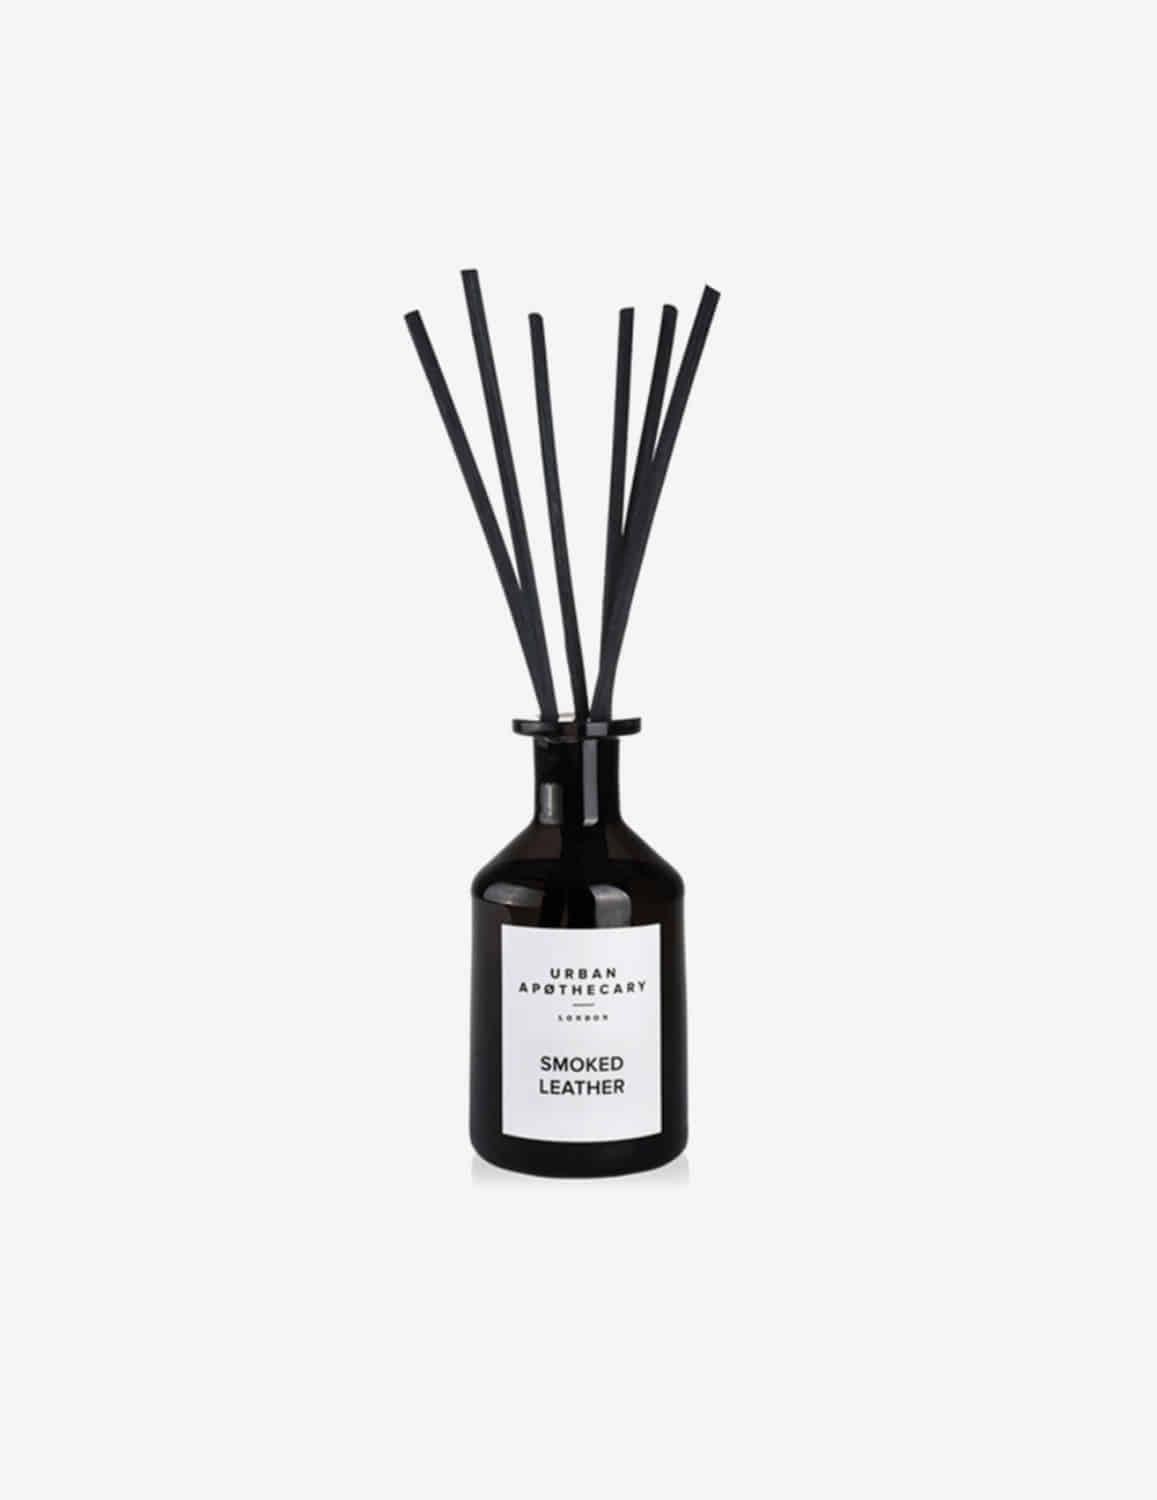 [Urban Apothecary] Smoked Leather / Luxury Diffuser